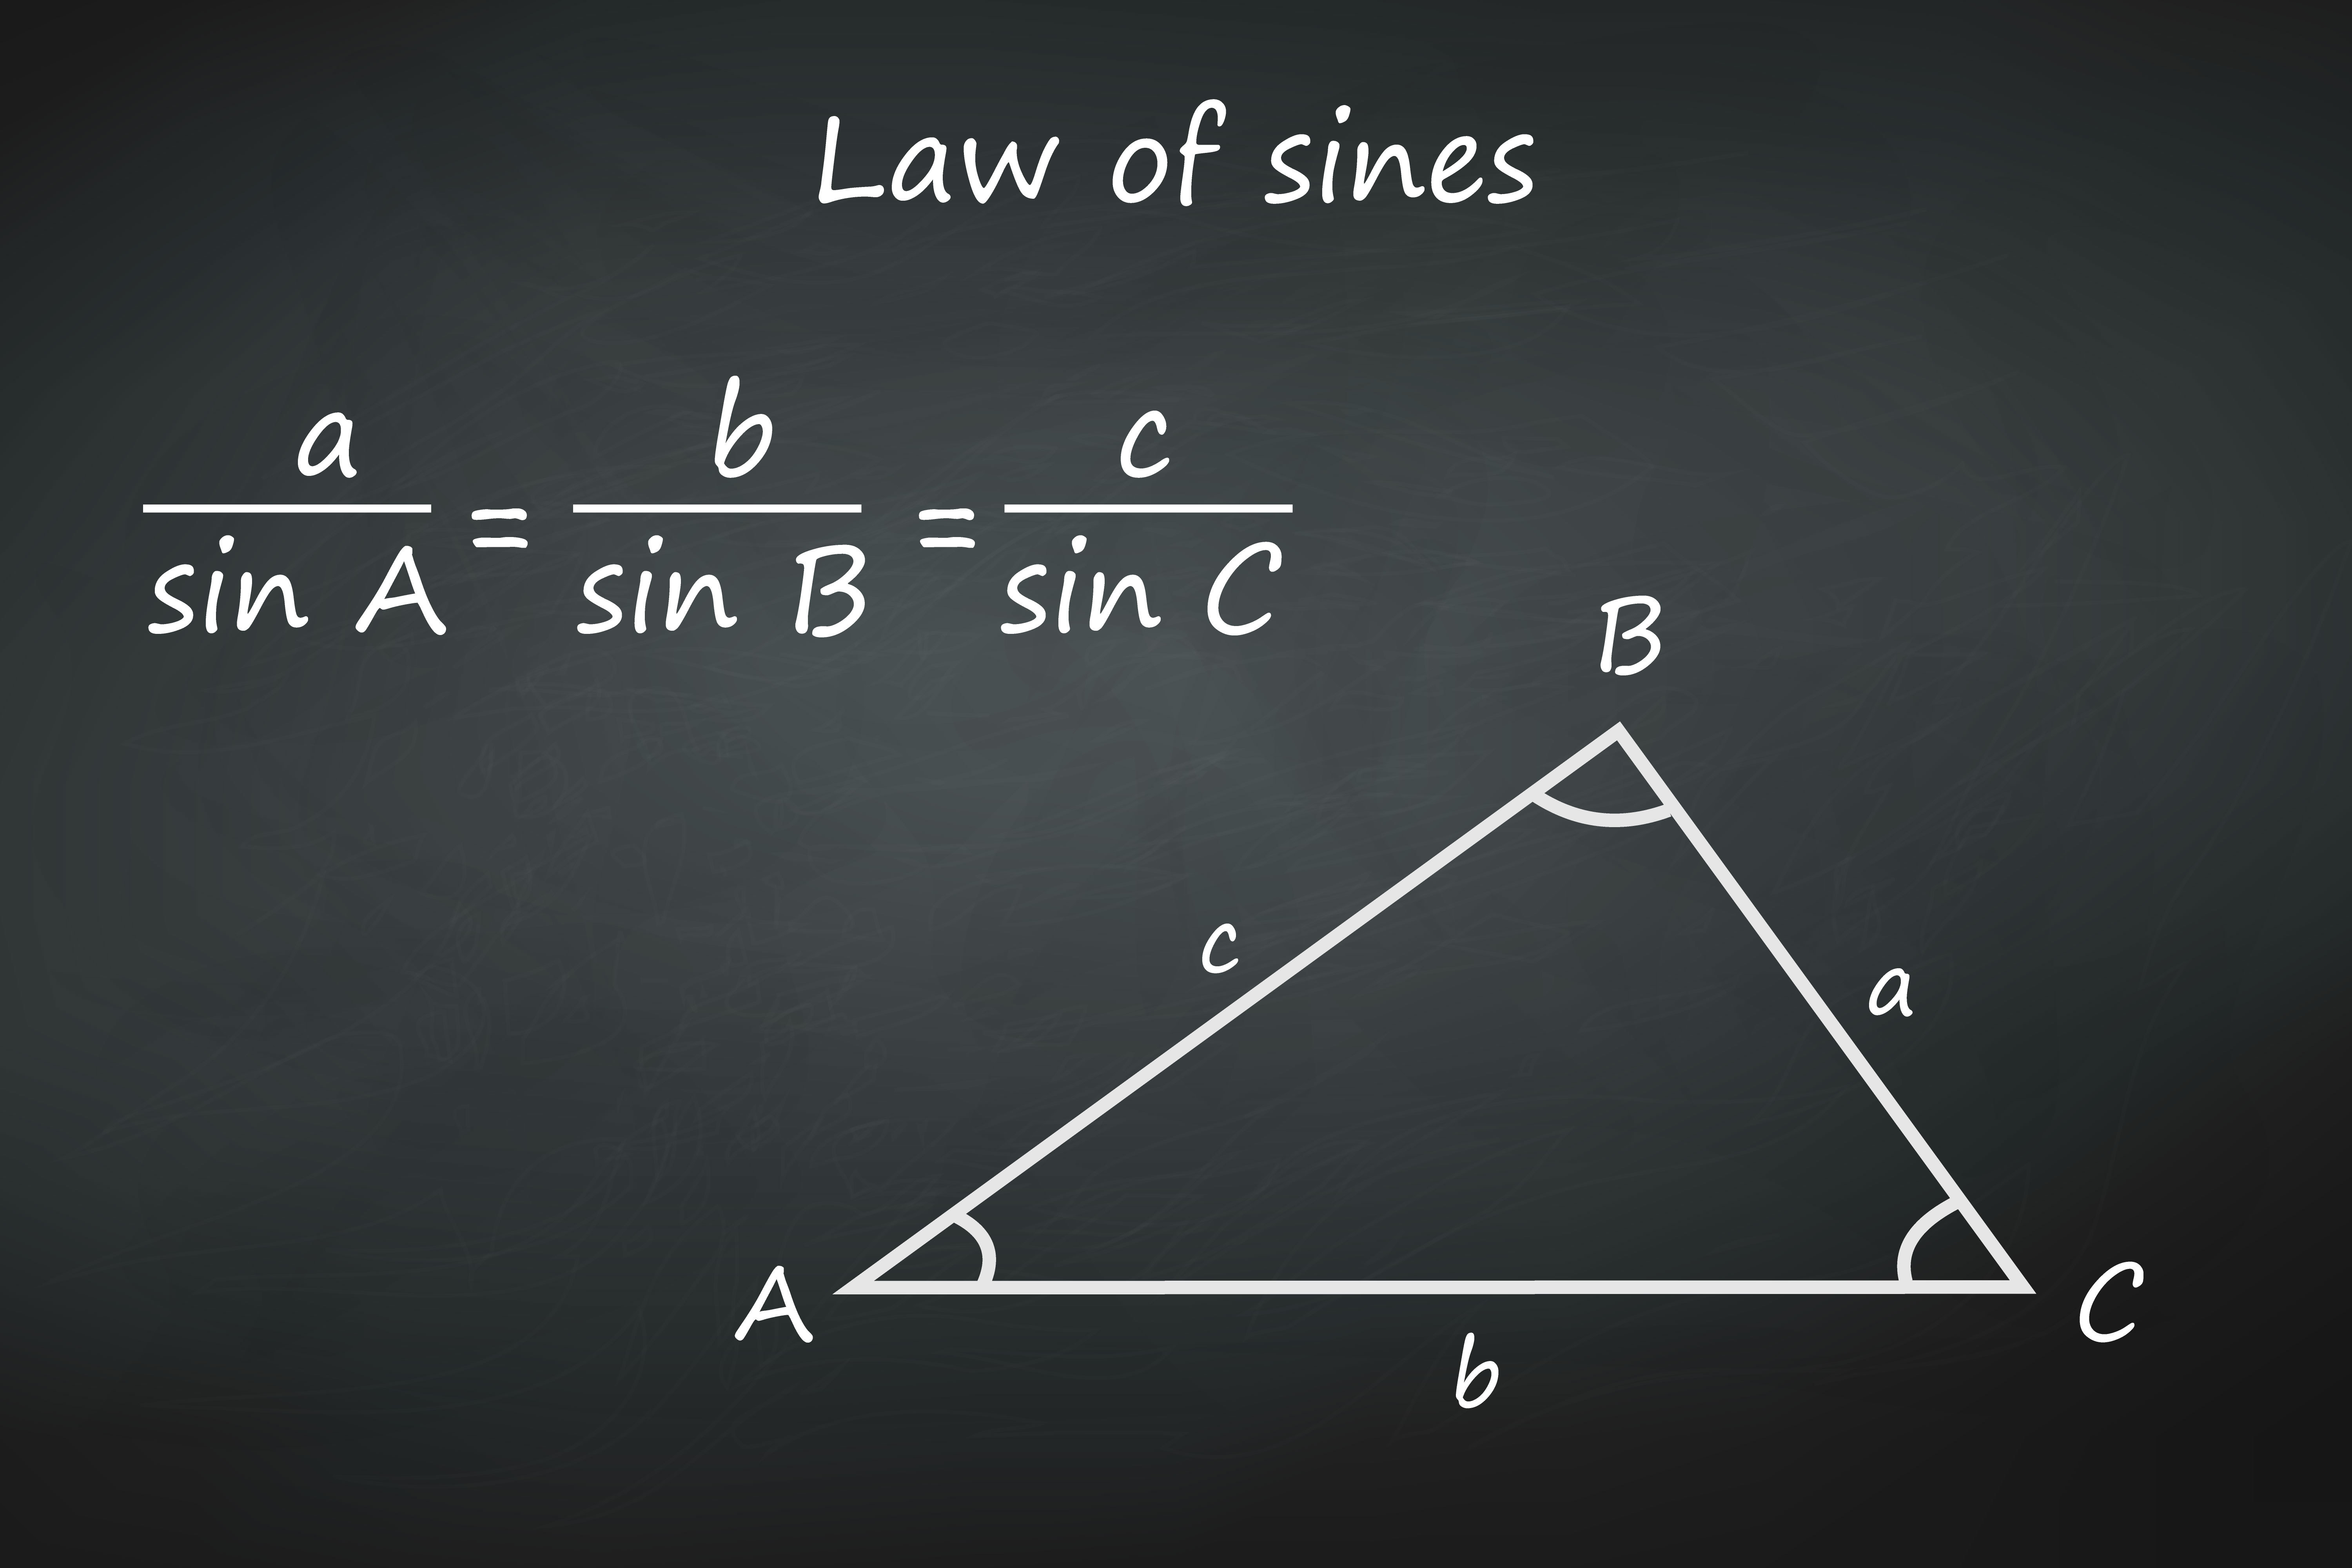 law of sines on chalkboard vector. law of sines on chalkboard Template for your design